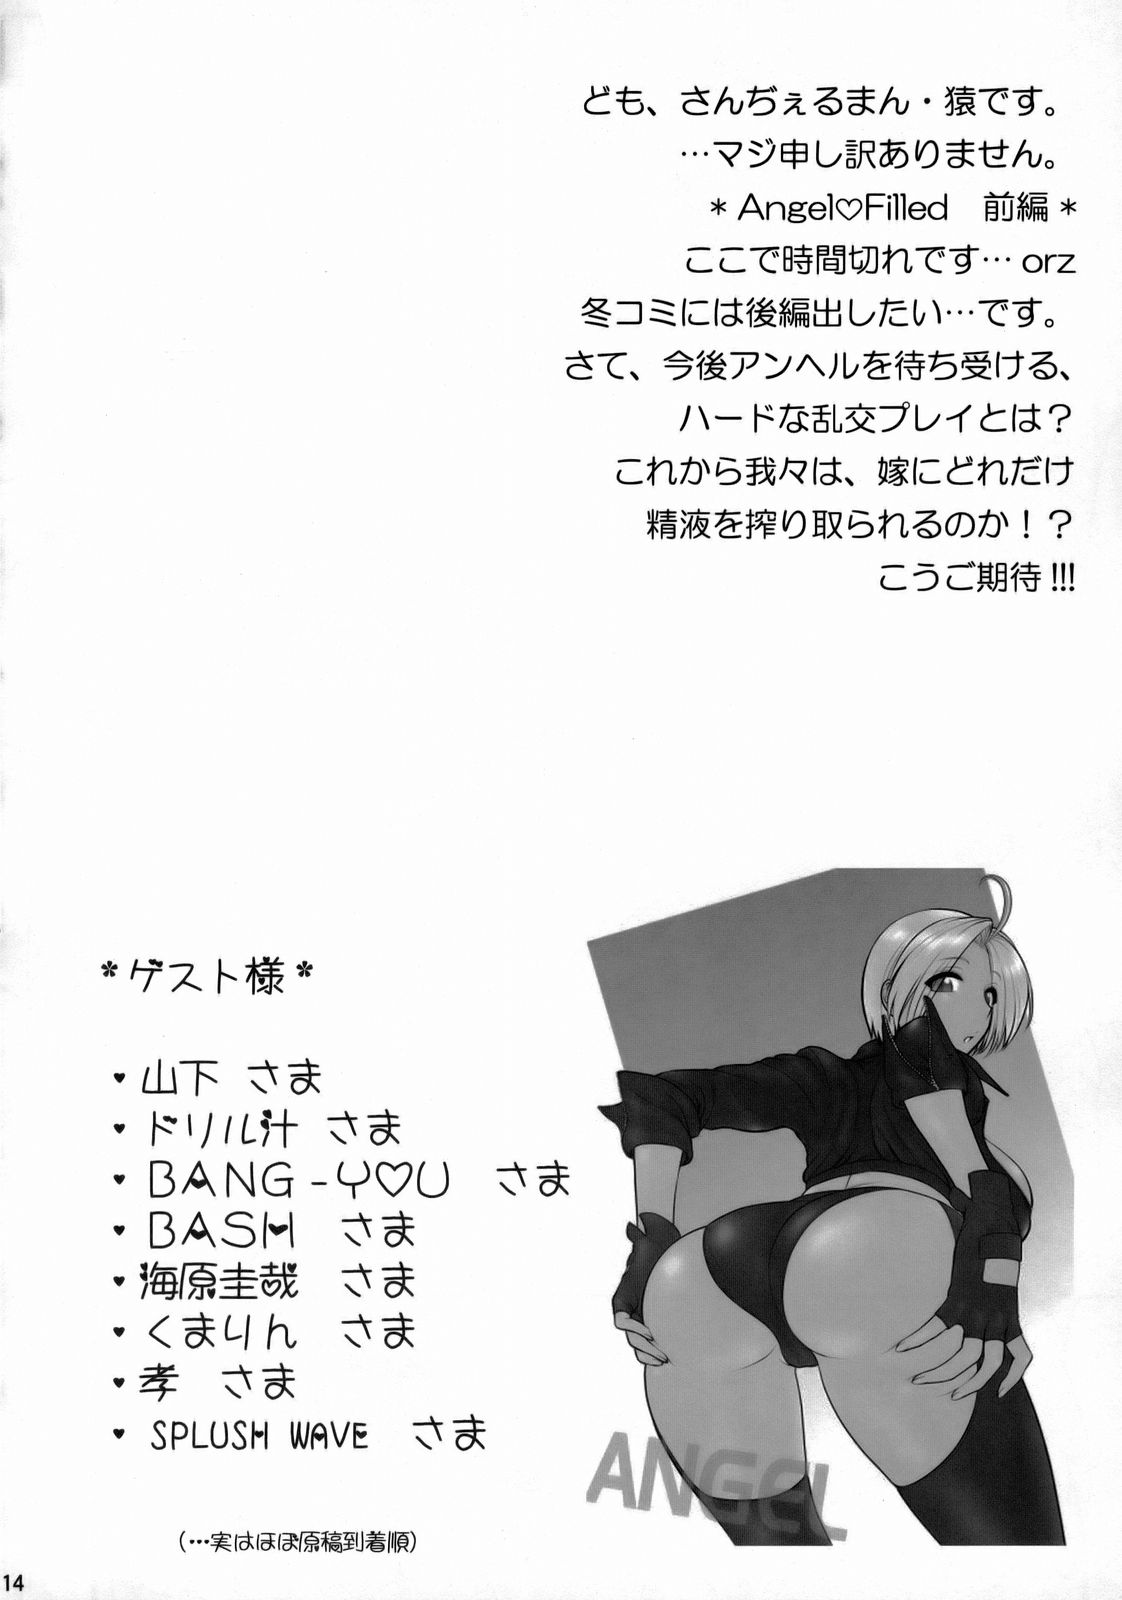 (C74) [Shinnihon Pepsitou (St.germain-sal)] Angel Filled Zenpen (King of Fighters) page 15 full